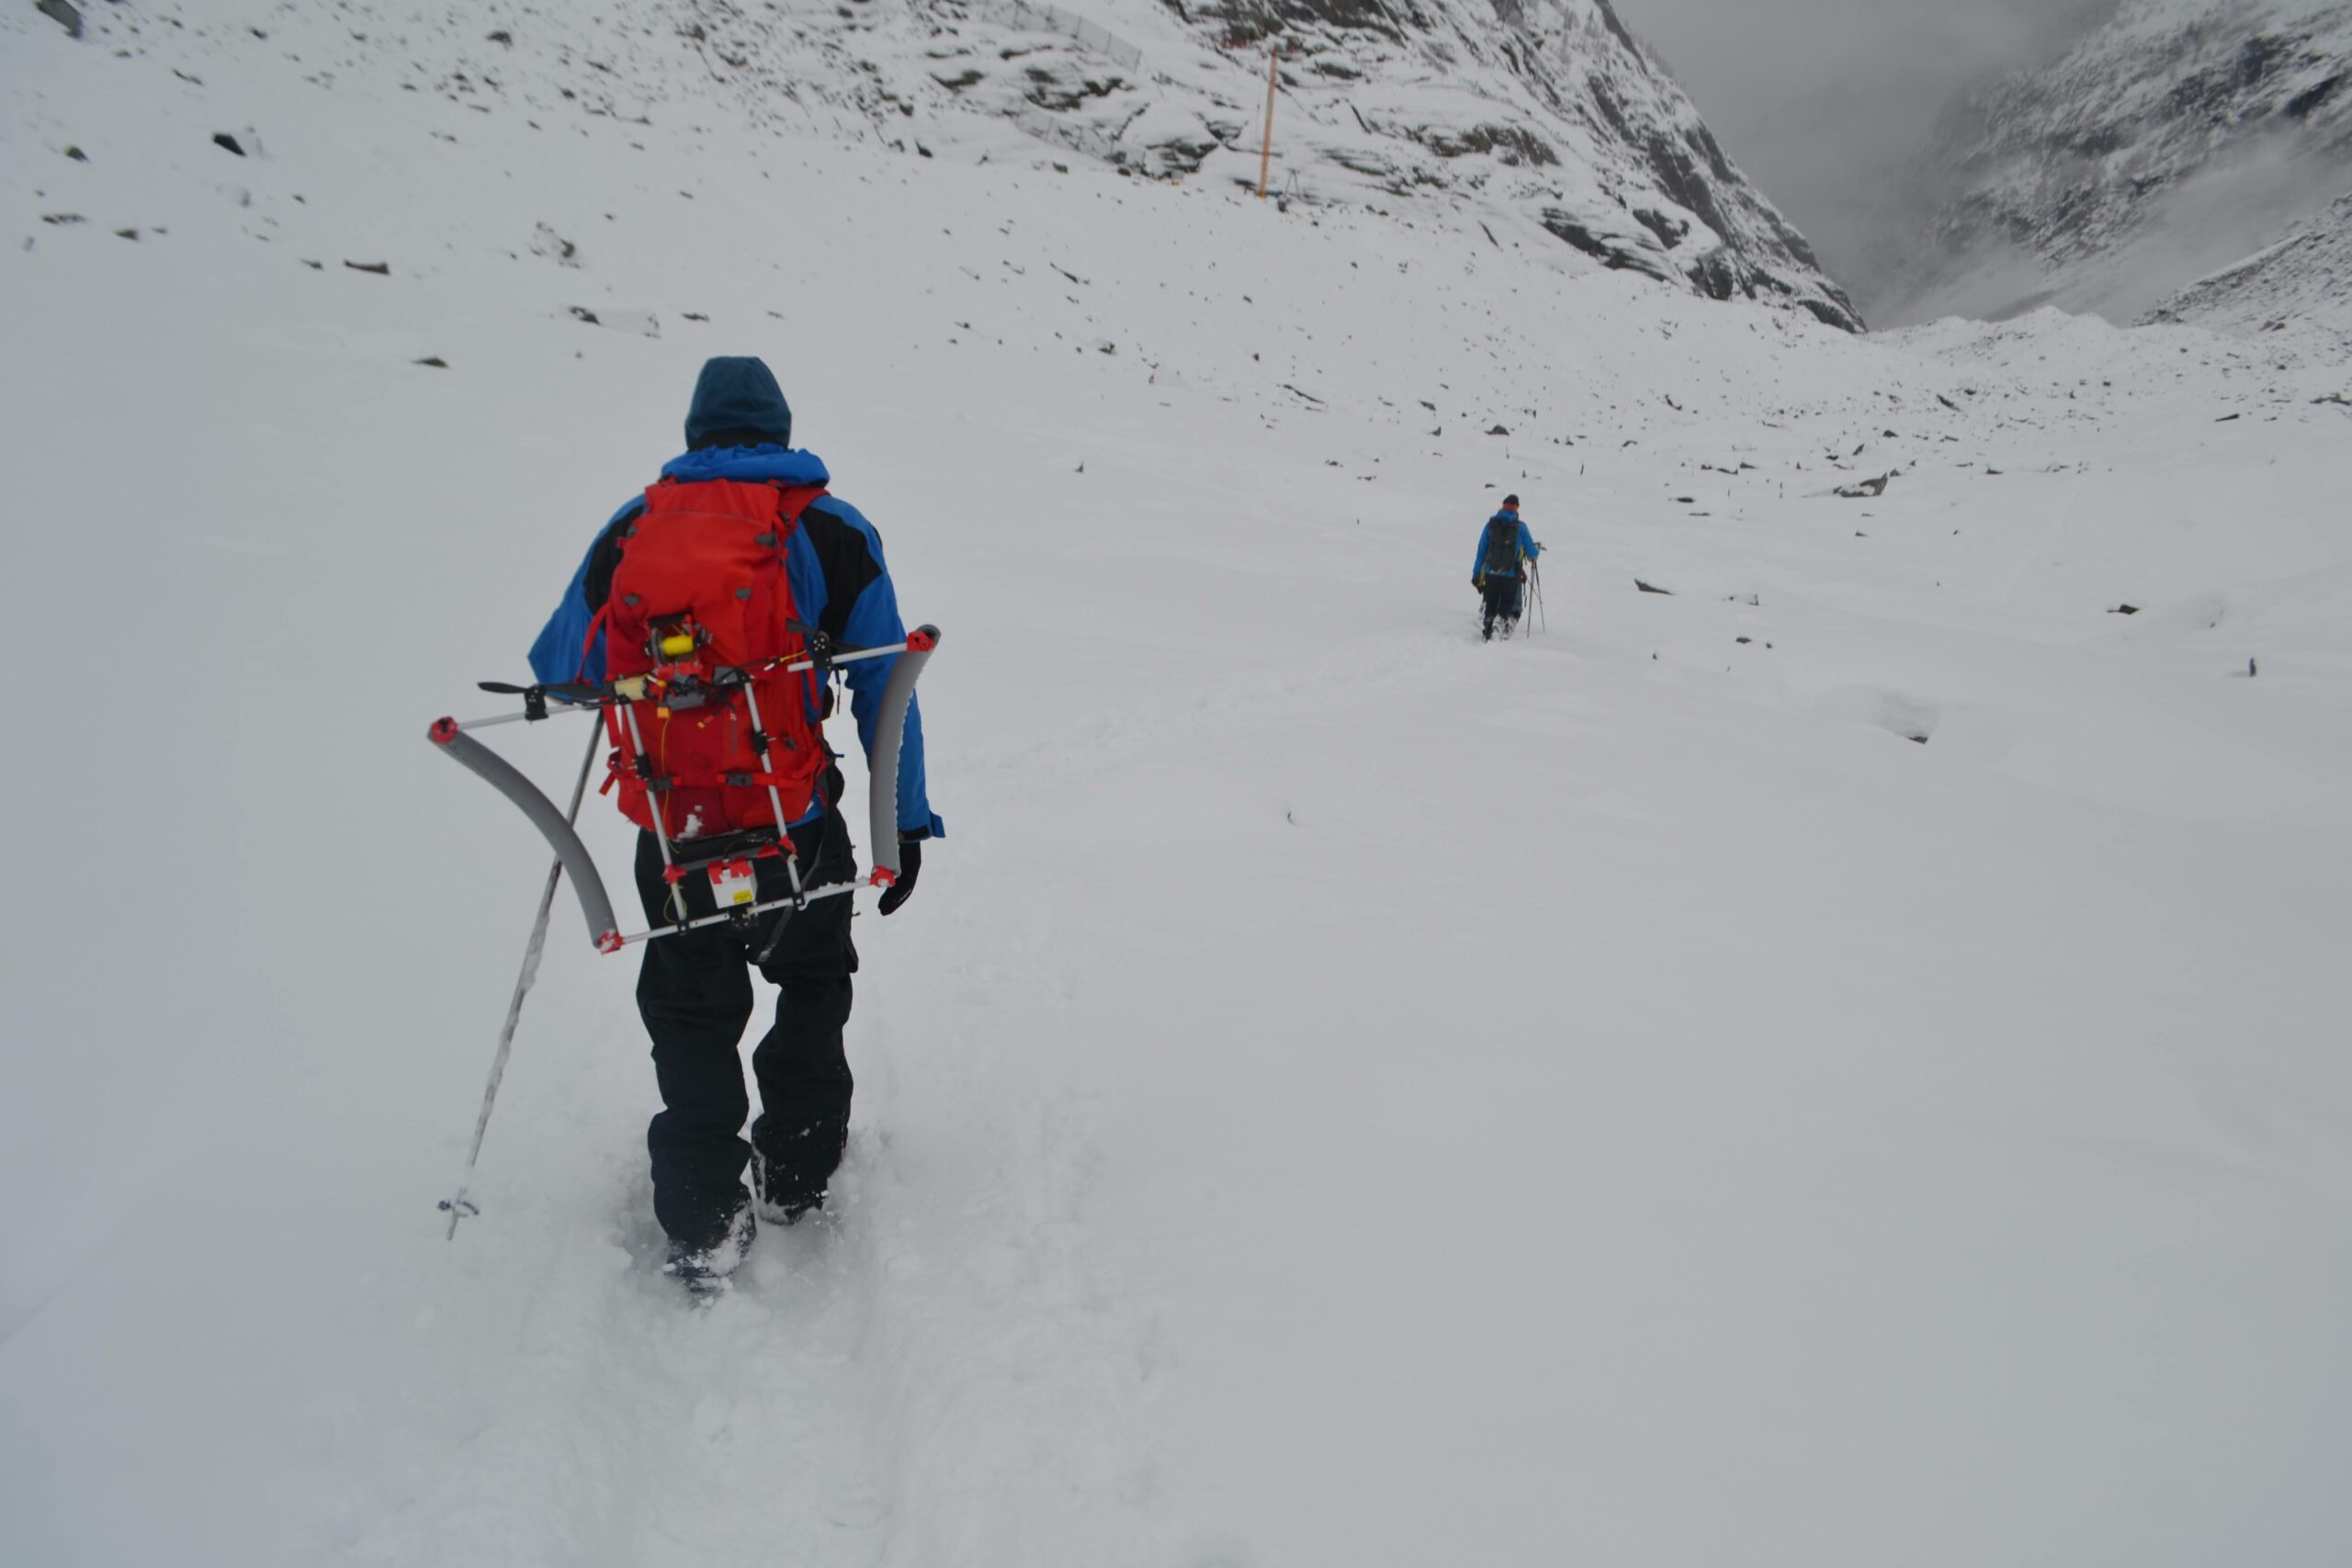 Two people descending a snowy slope carrying scientific instruments on their back